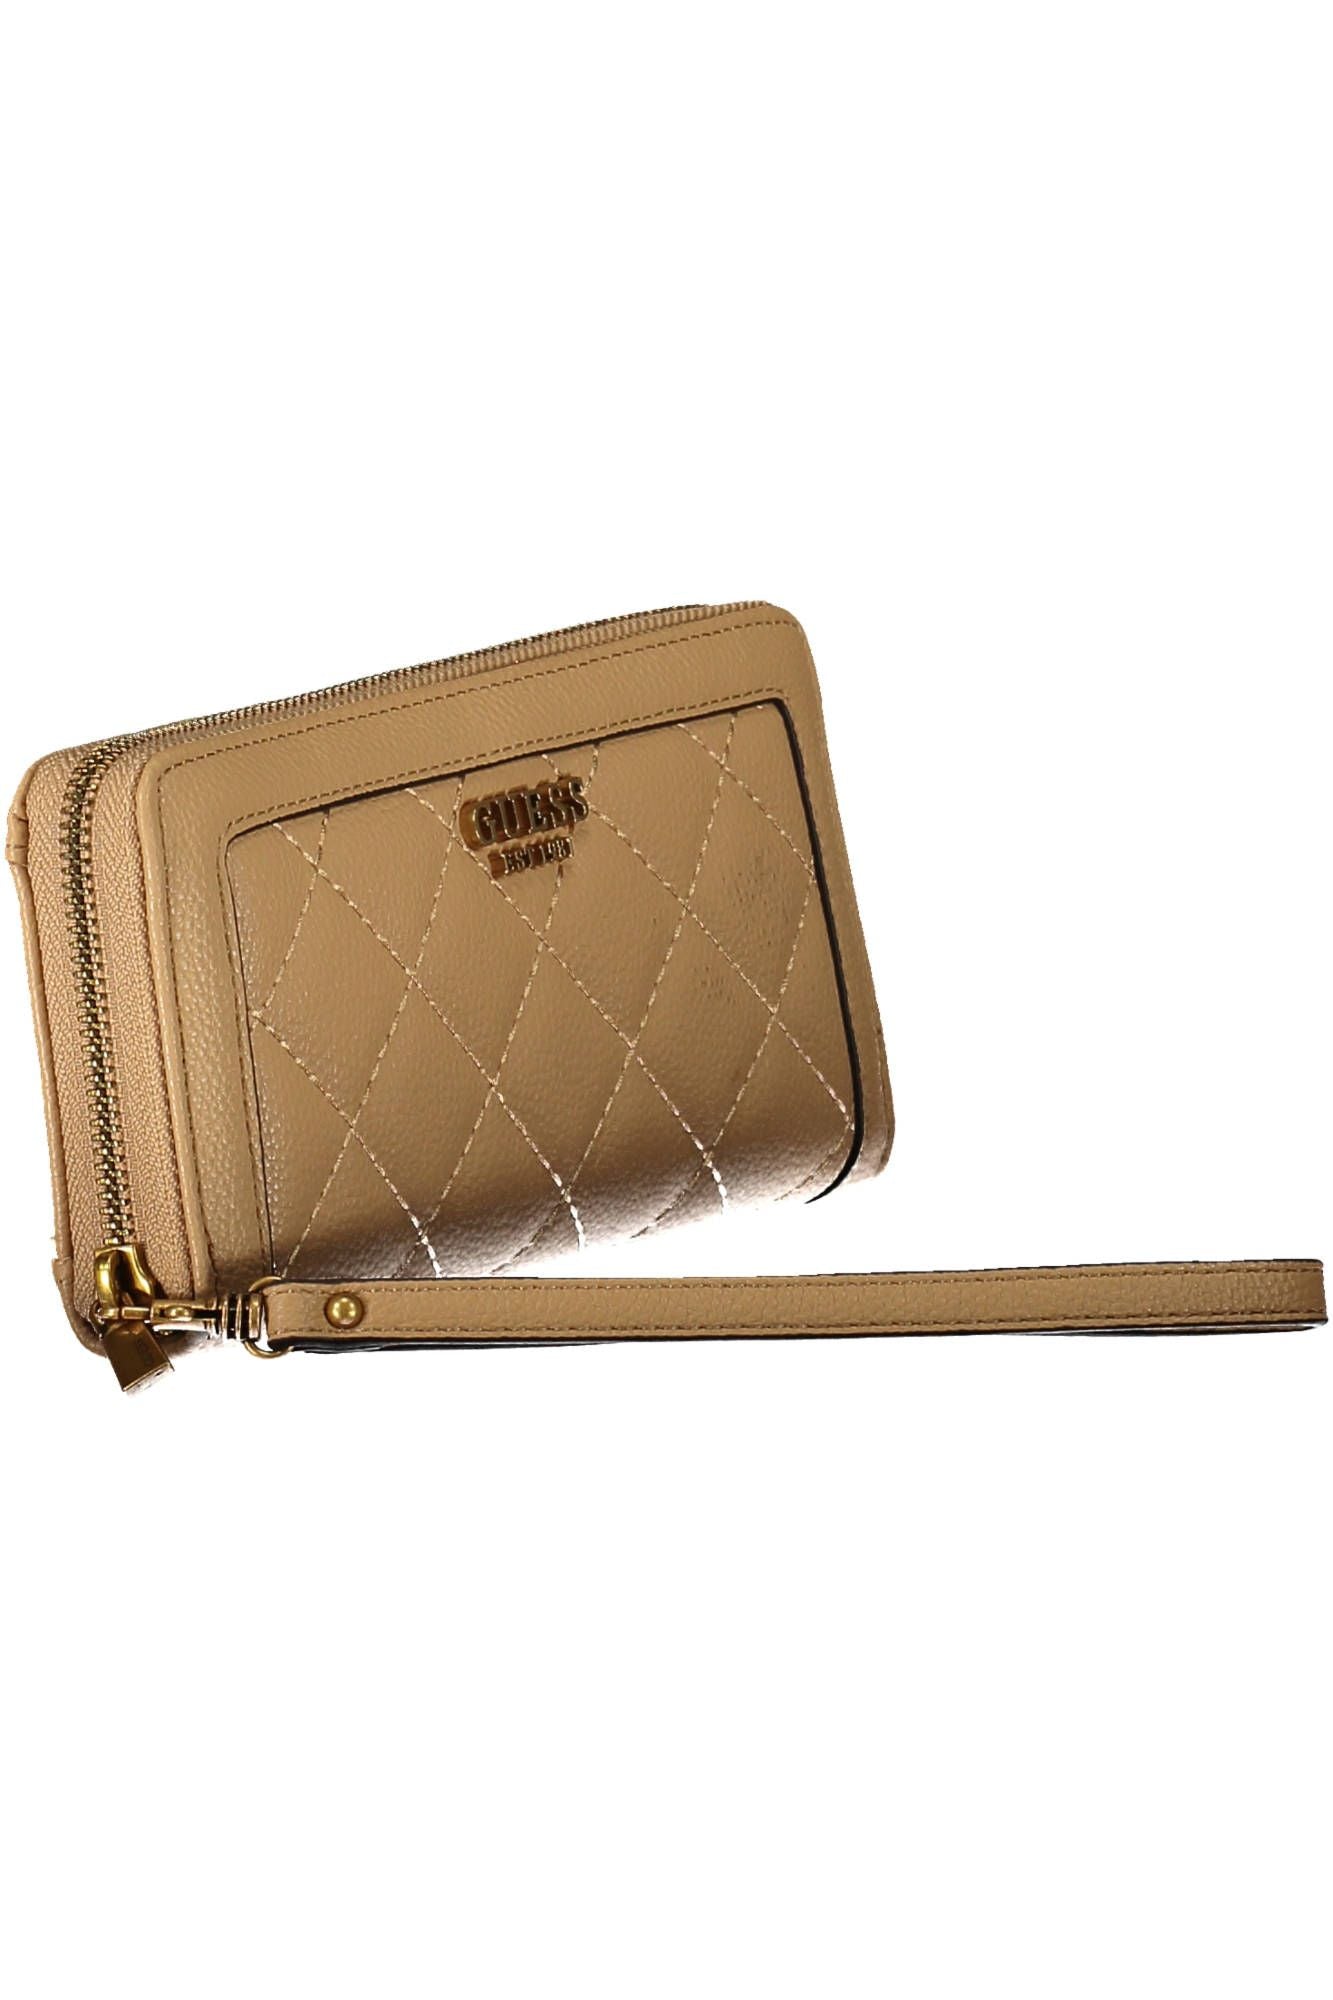 Chic Beige Multi-Compartment Wallet with Contrasting Details